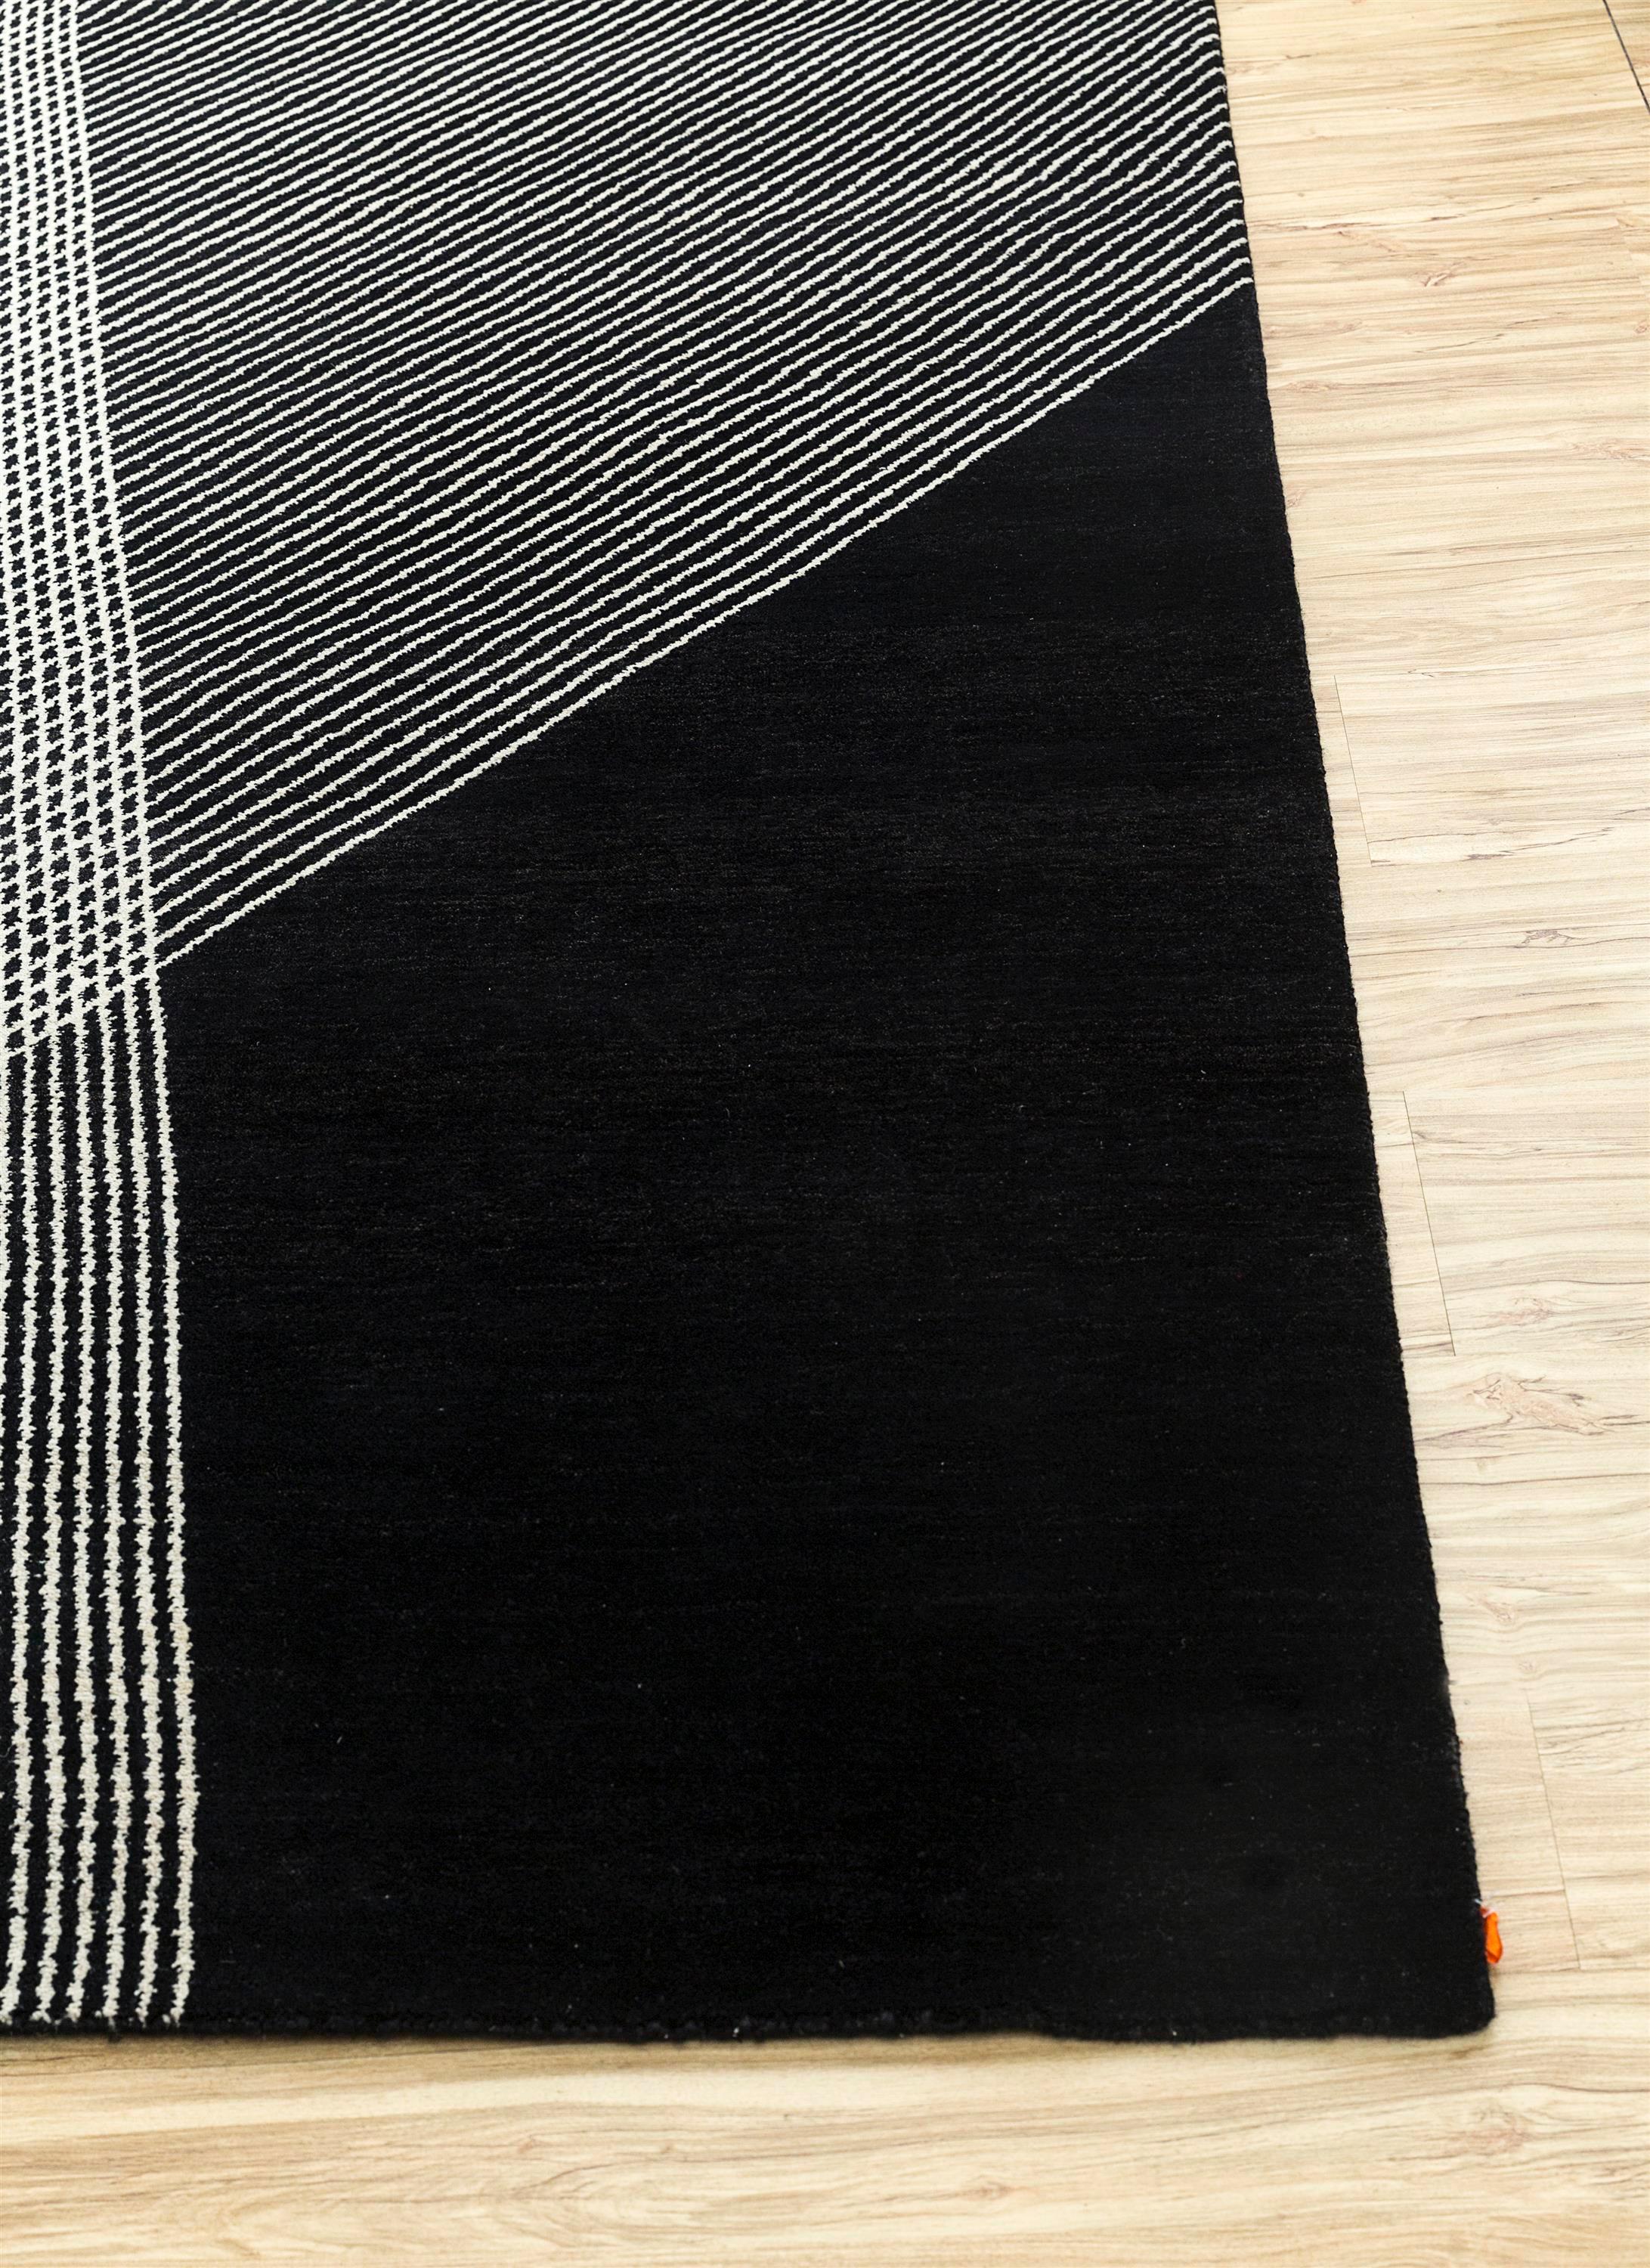 Seeking a geometric rug that transcends ordinary design? Explore the extraordinary with this Hand-Knotted Rug. Handmade in rural India, it showcases a captivating play of color blocks and symmetric lines. The ground color, an enticing ebony,